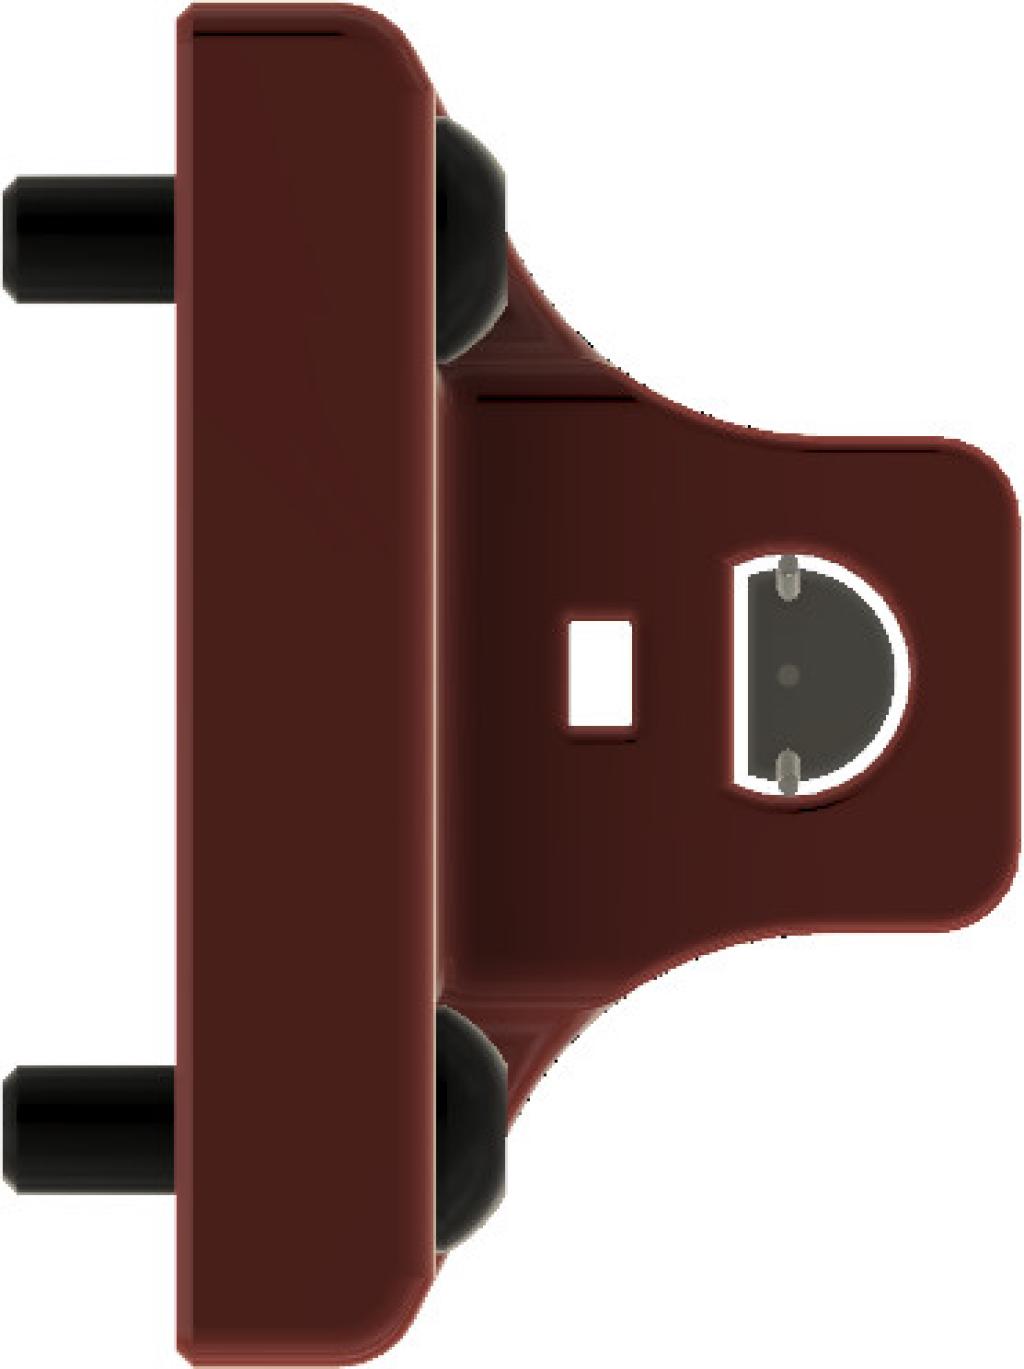 CAD mount back view